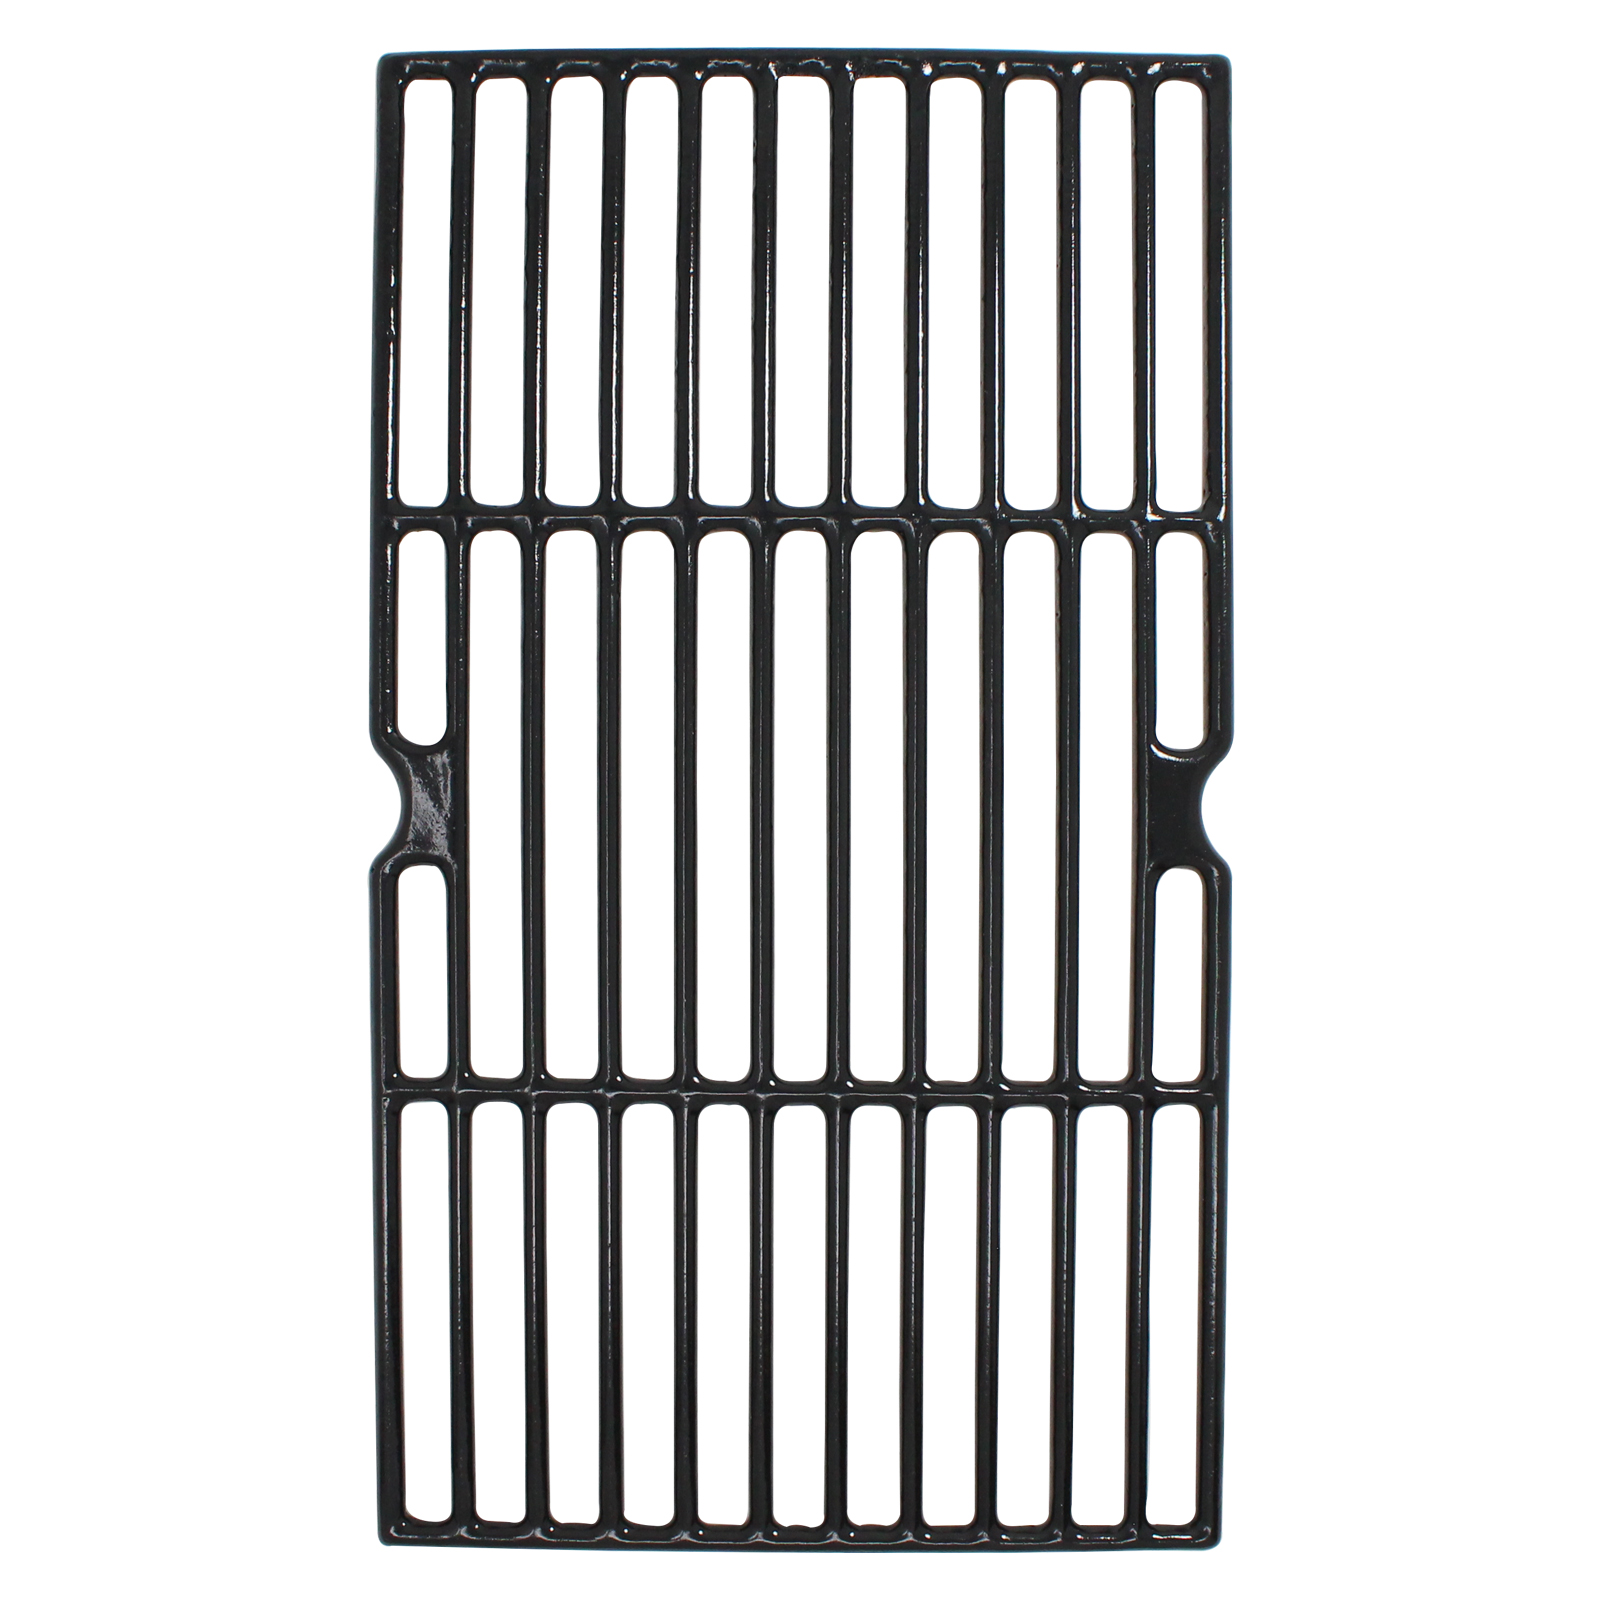 BBQ Grill Cooking Grates Replacement Parts for Kenmore 415.16114010 - Compatible Barbeque Cast Iron Grid 16 3/4" - image 4 of 4